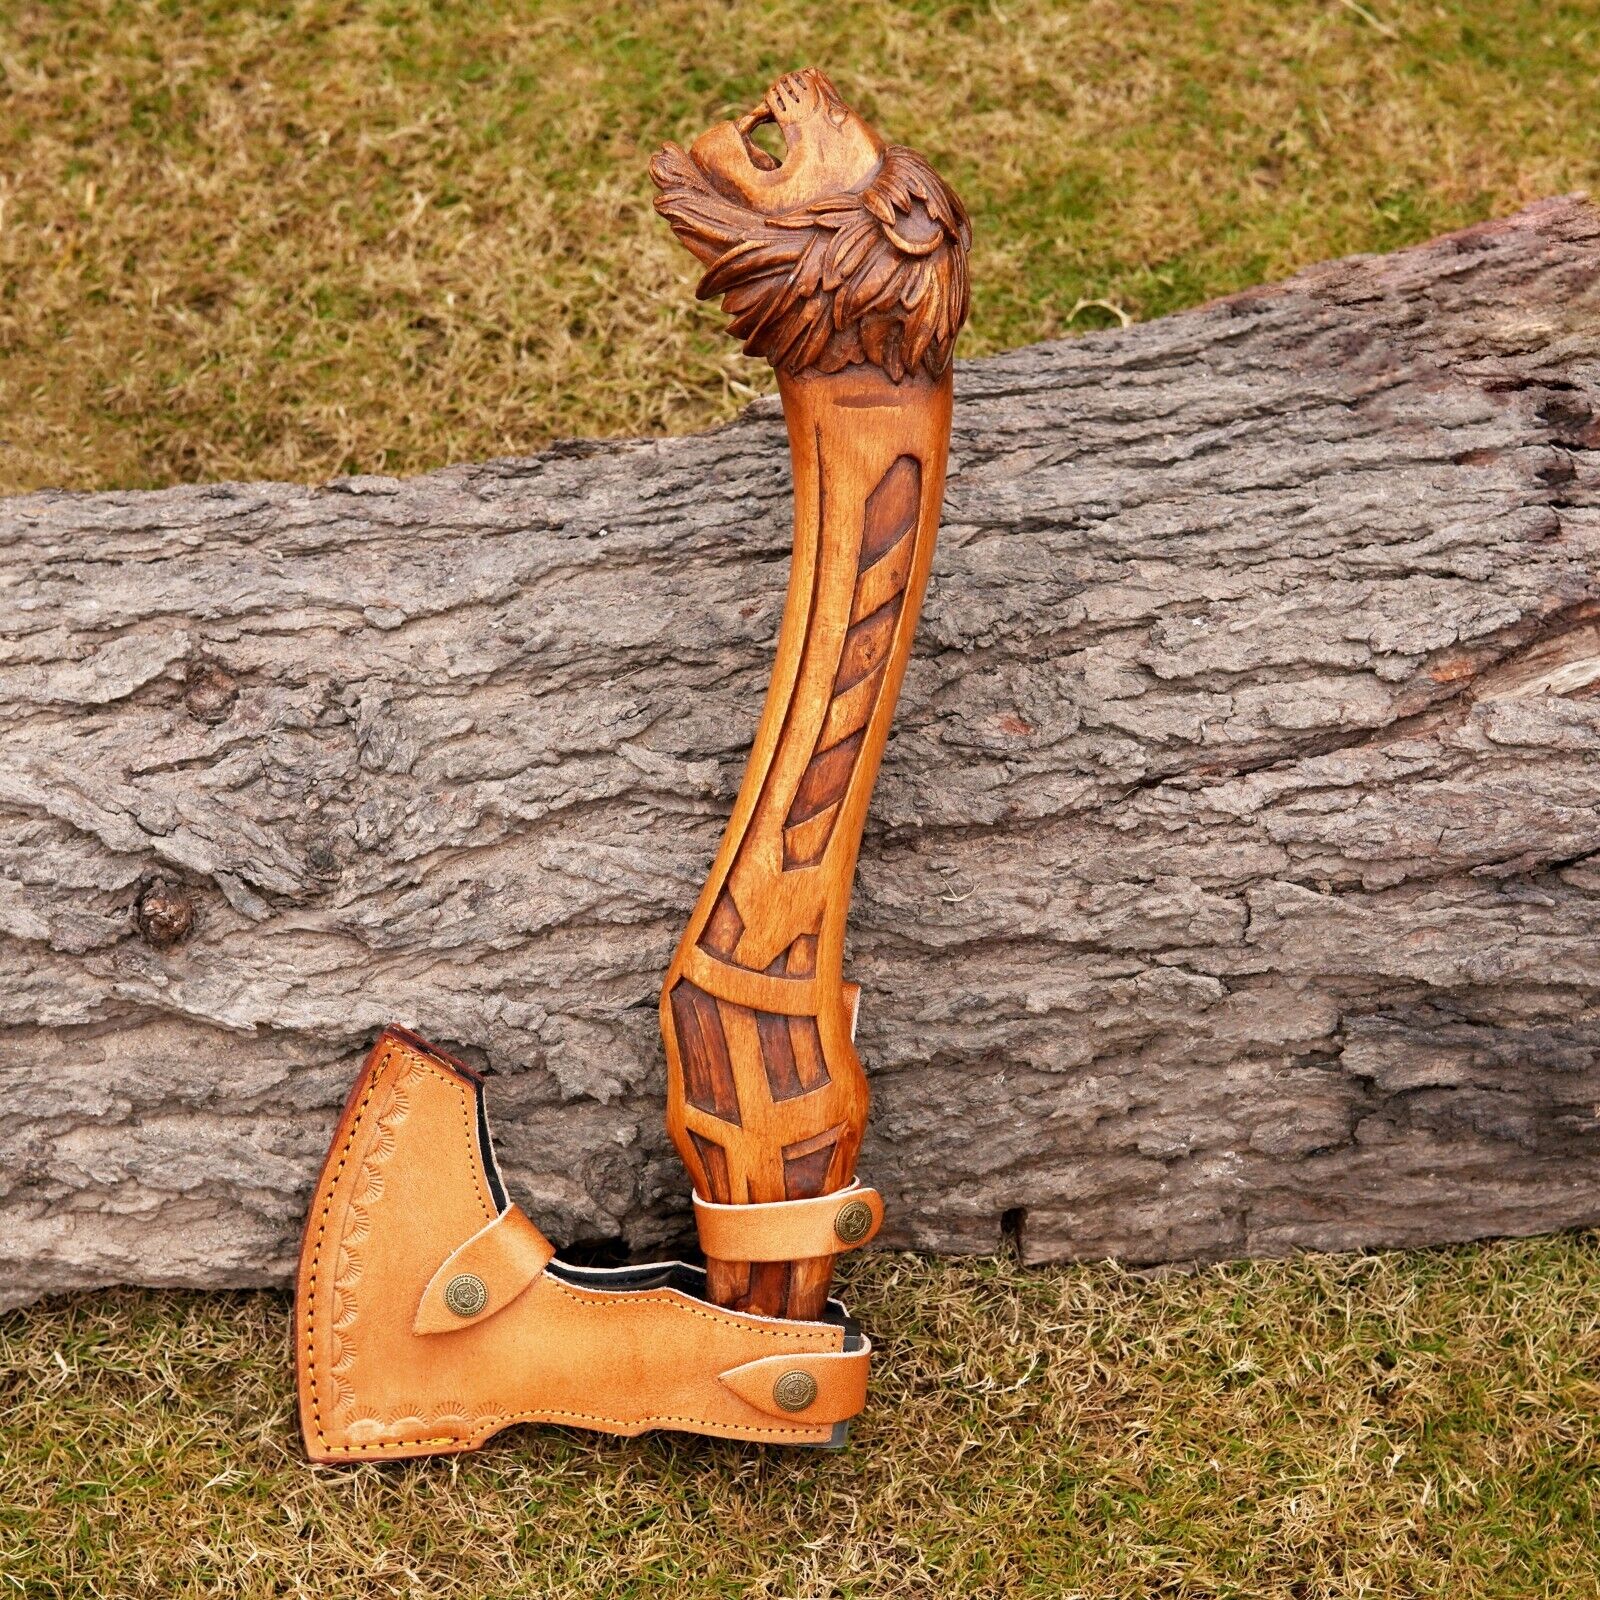 LION WOOD HANDLE BEST OUTDOOR CAMPING VIKING AXE W/SHEATH | BEST GIFTS FOR HIM